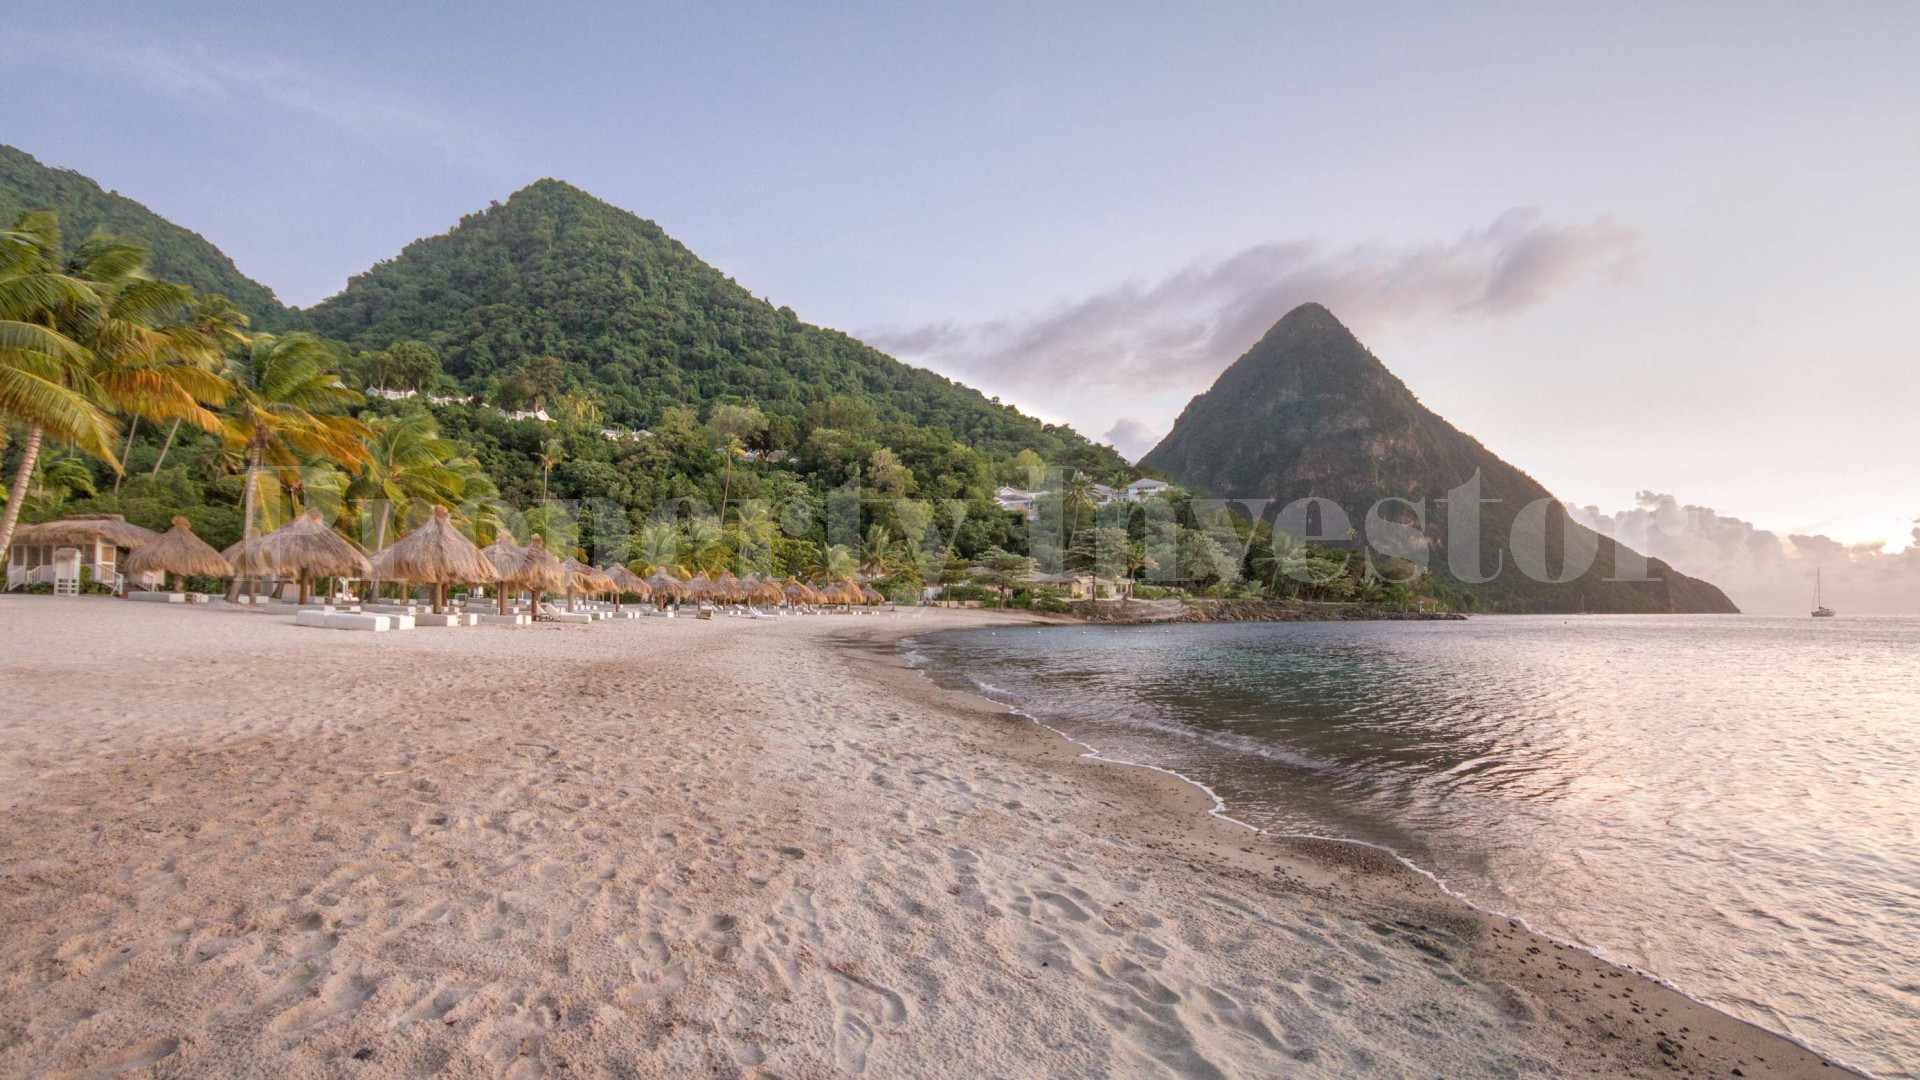 Ultra-Exclusive 4 Bedroom Luxury Beachfront Residence in Saint Lucia